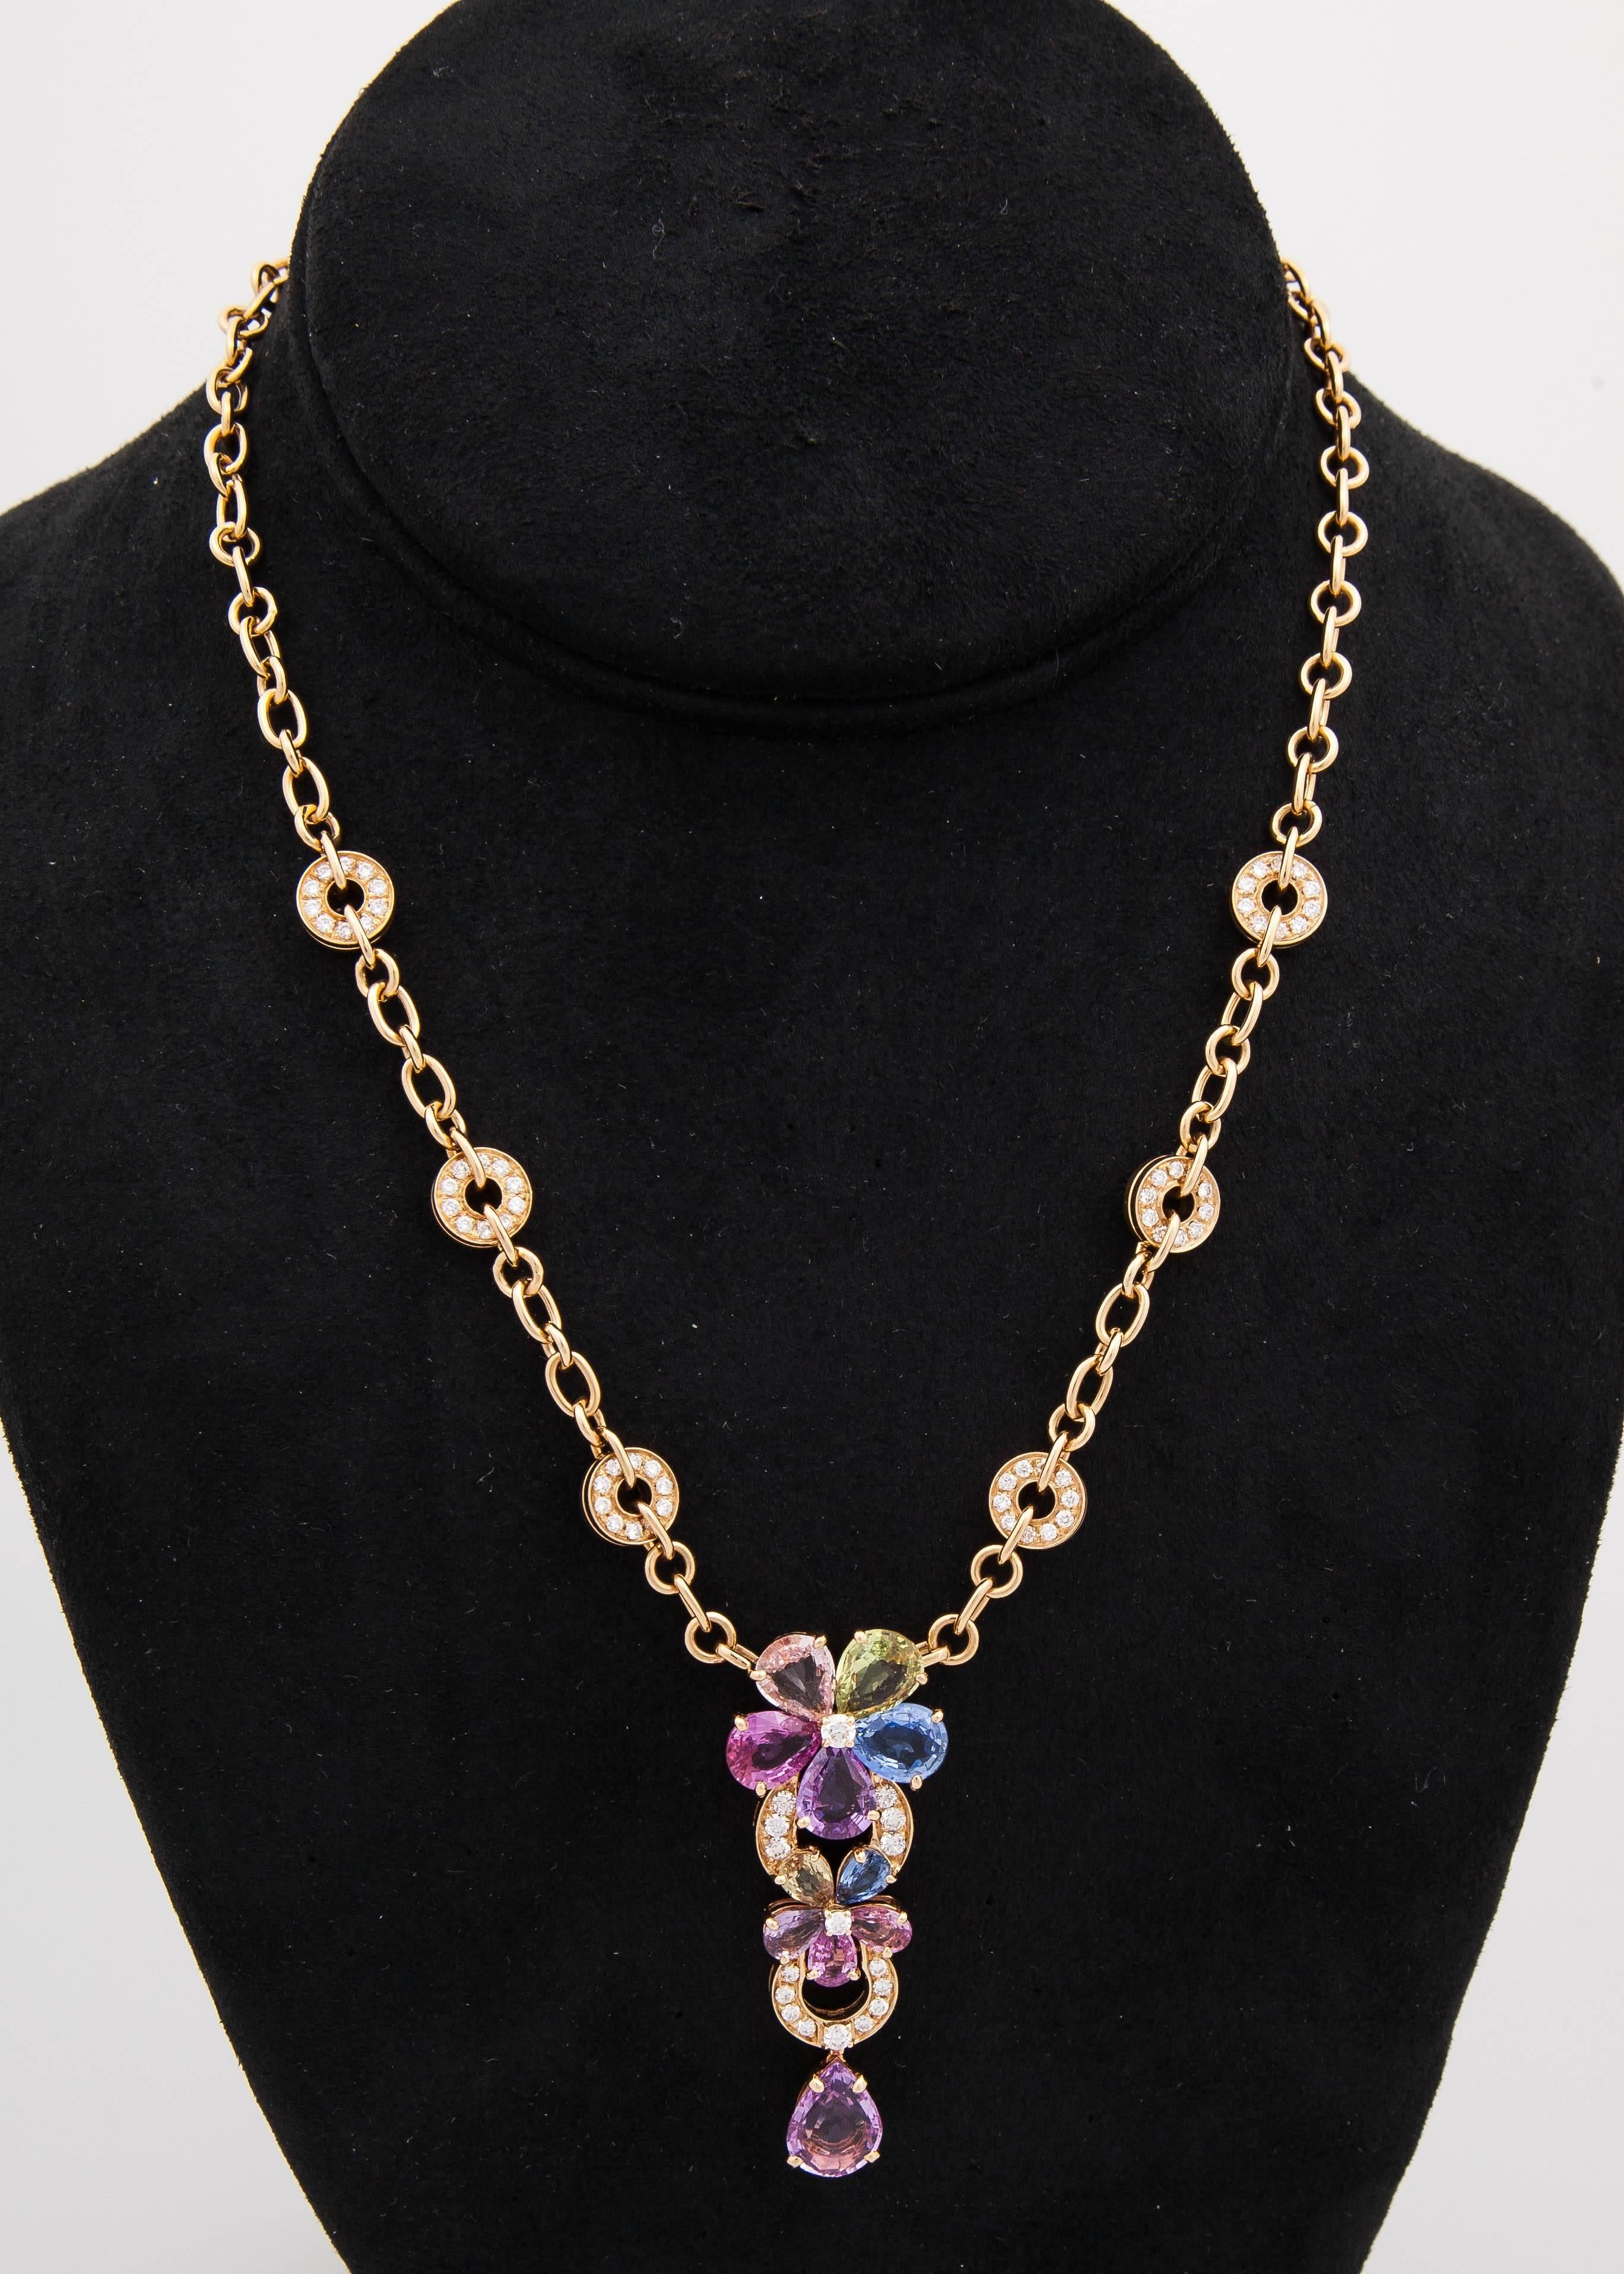 Lovely BULGARI Necklace is  designed as a stylized flower, decorated with multi-colored Sapphires weighing approx. 11.53 carats and round-shaped brilliant cut diamonds weighing approx. 2.25 carats, mounted in 18k yellow gold.